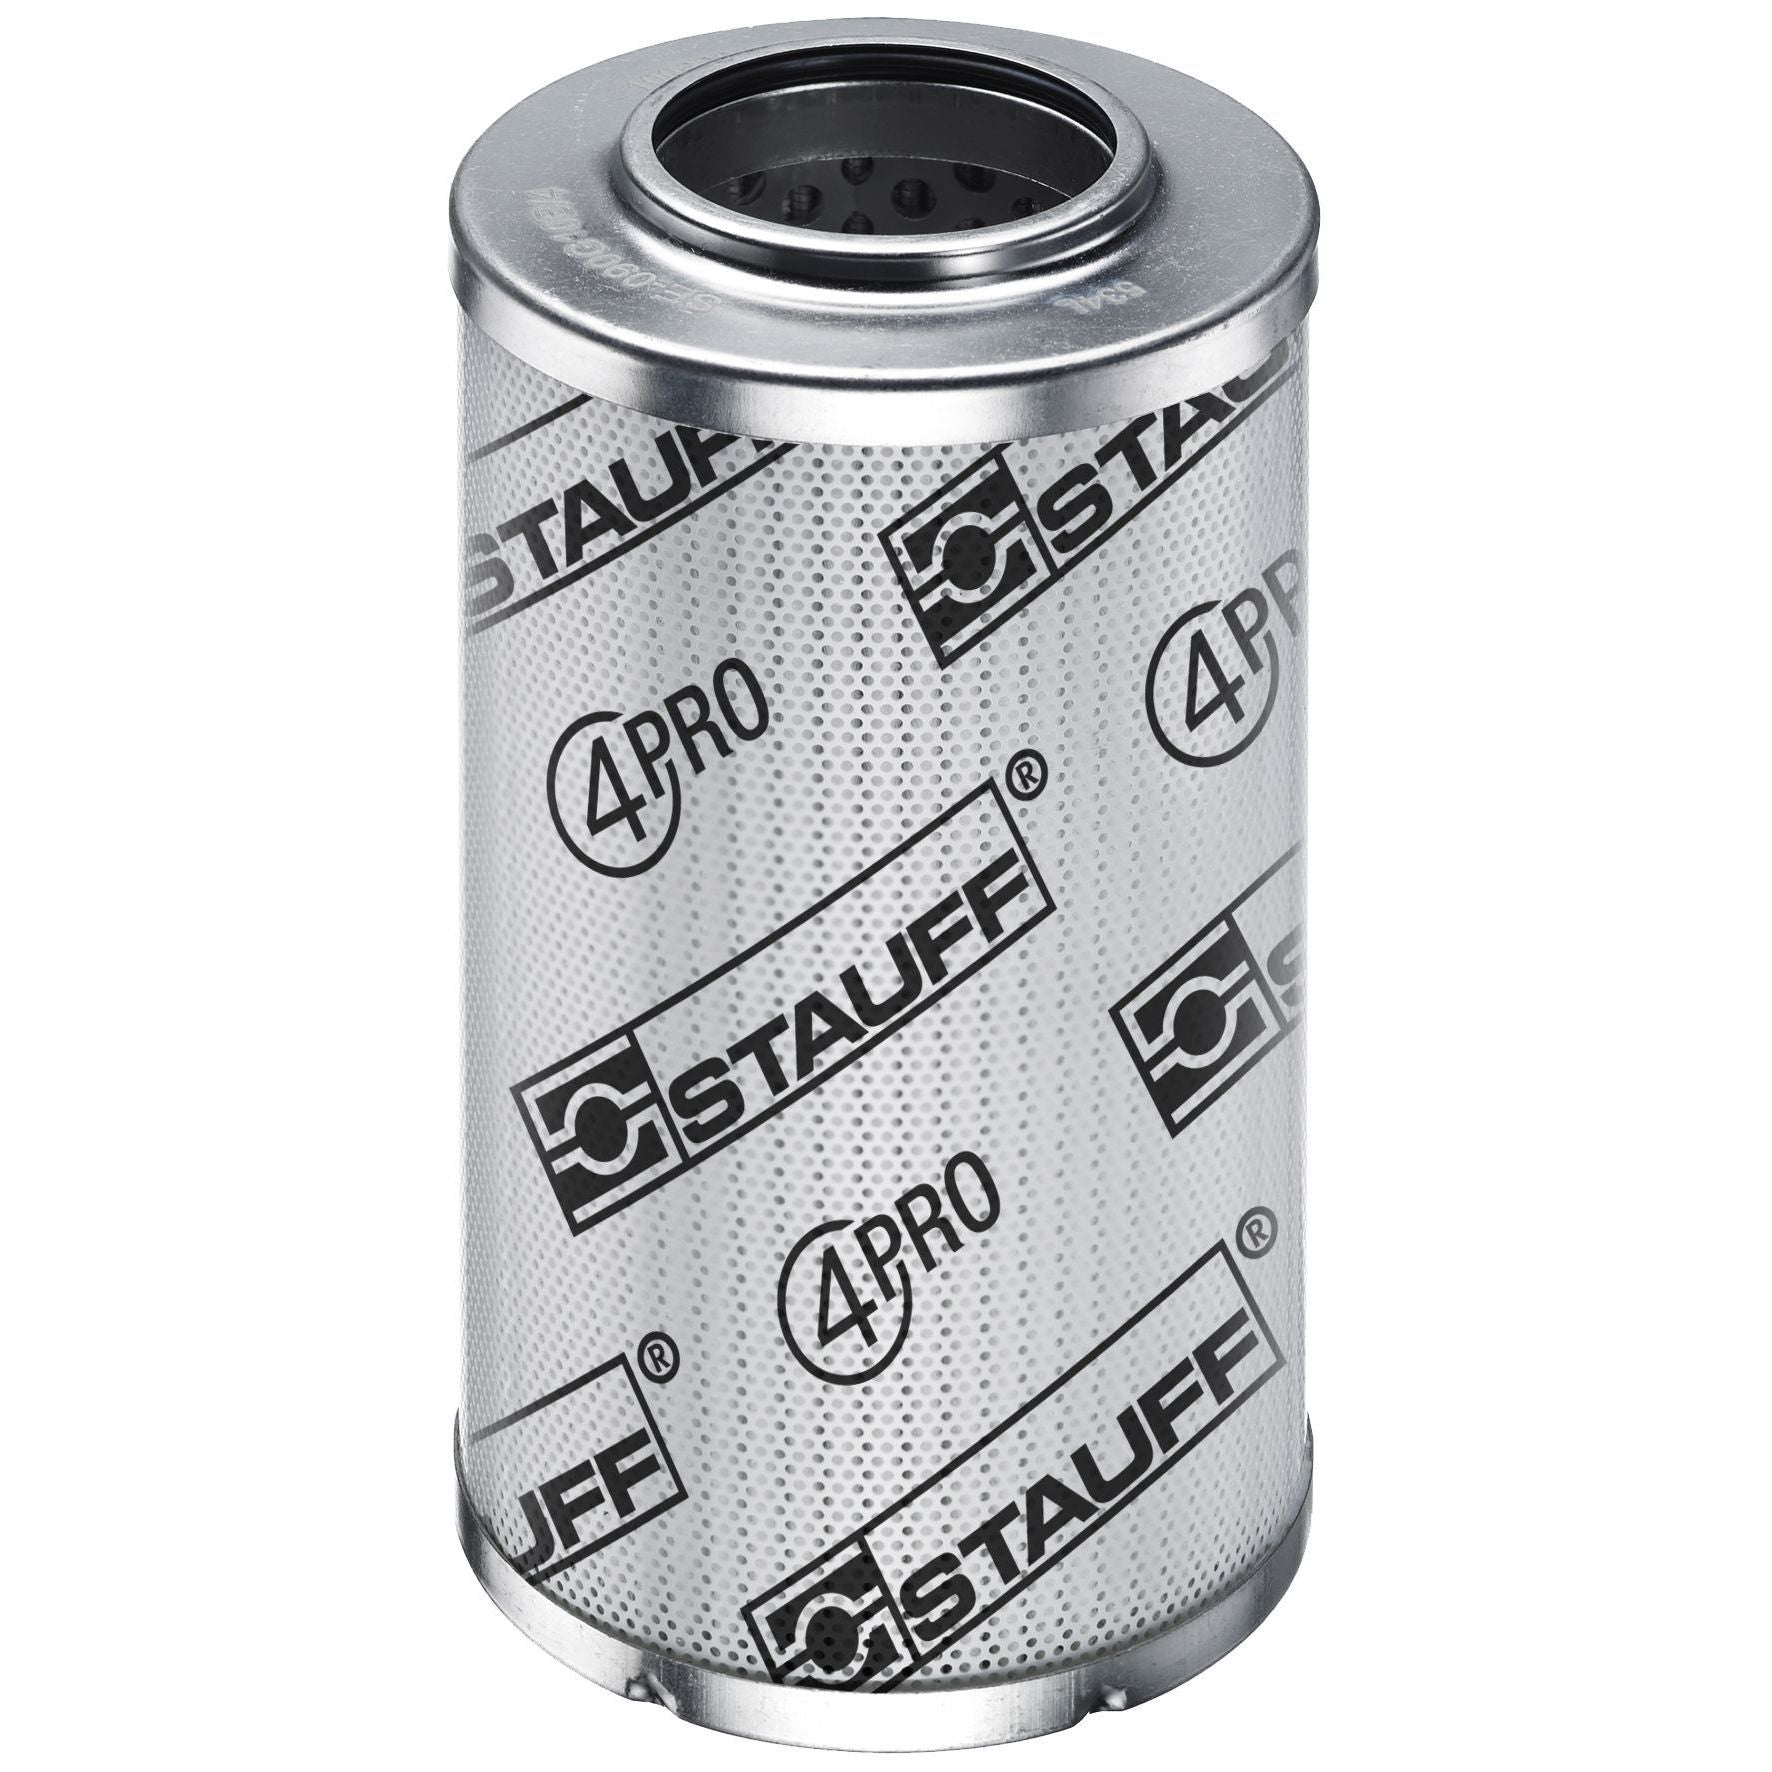 SE-014-G-10-V/4 : Stauff SF-014 Series Filter Element, 10 Micron, Synthetic, 363psi Collapse Differential, Viton Seals